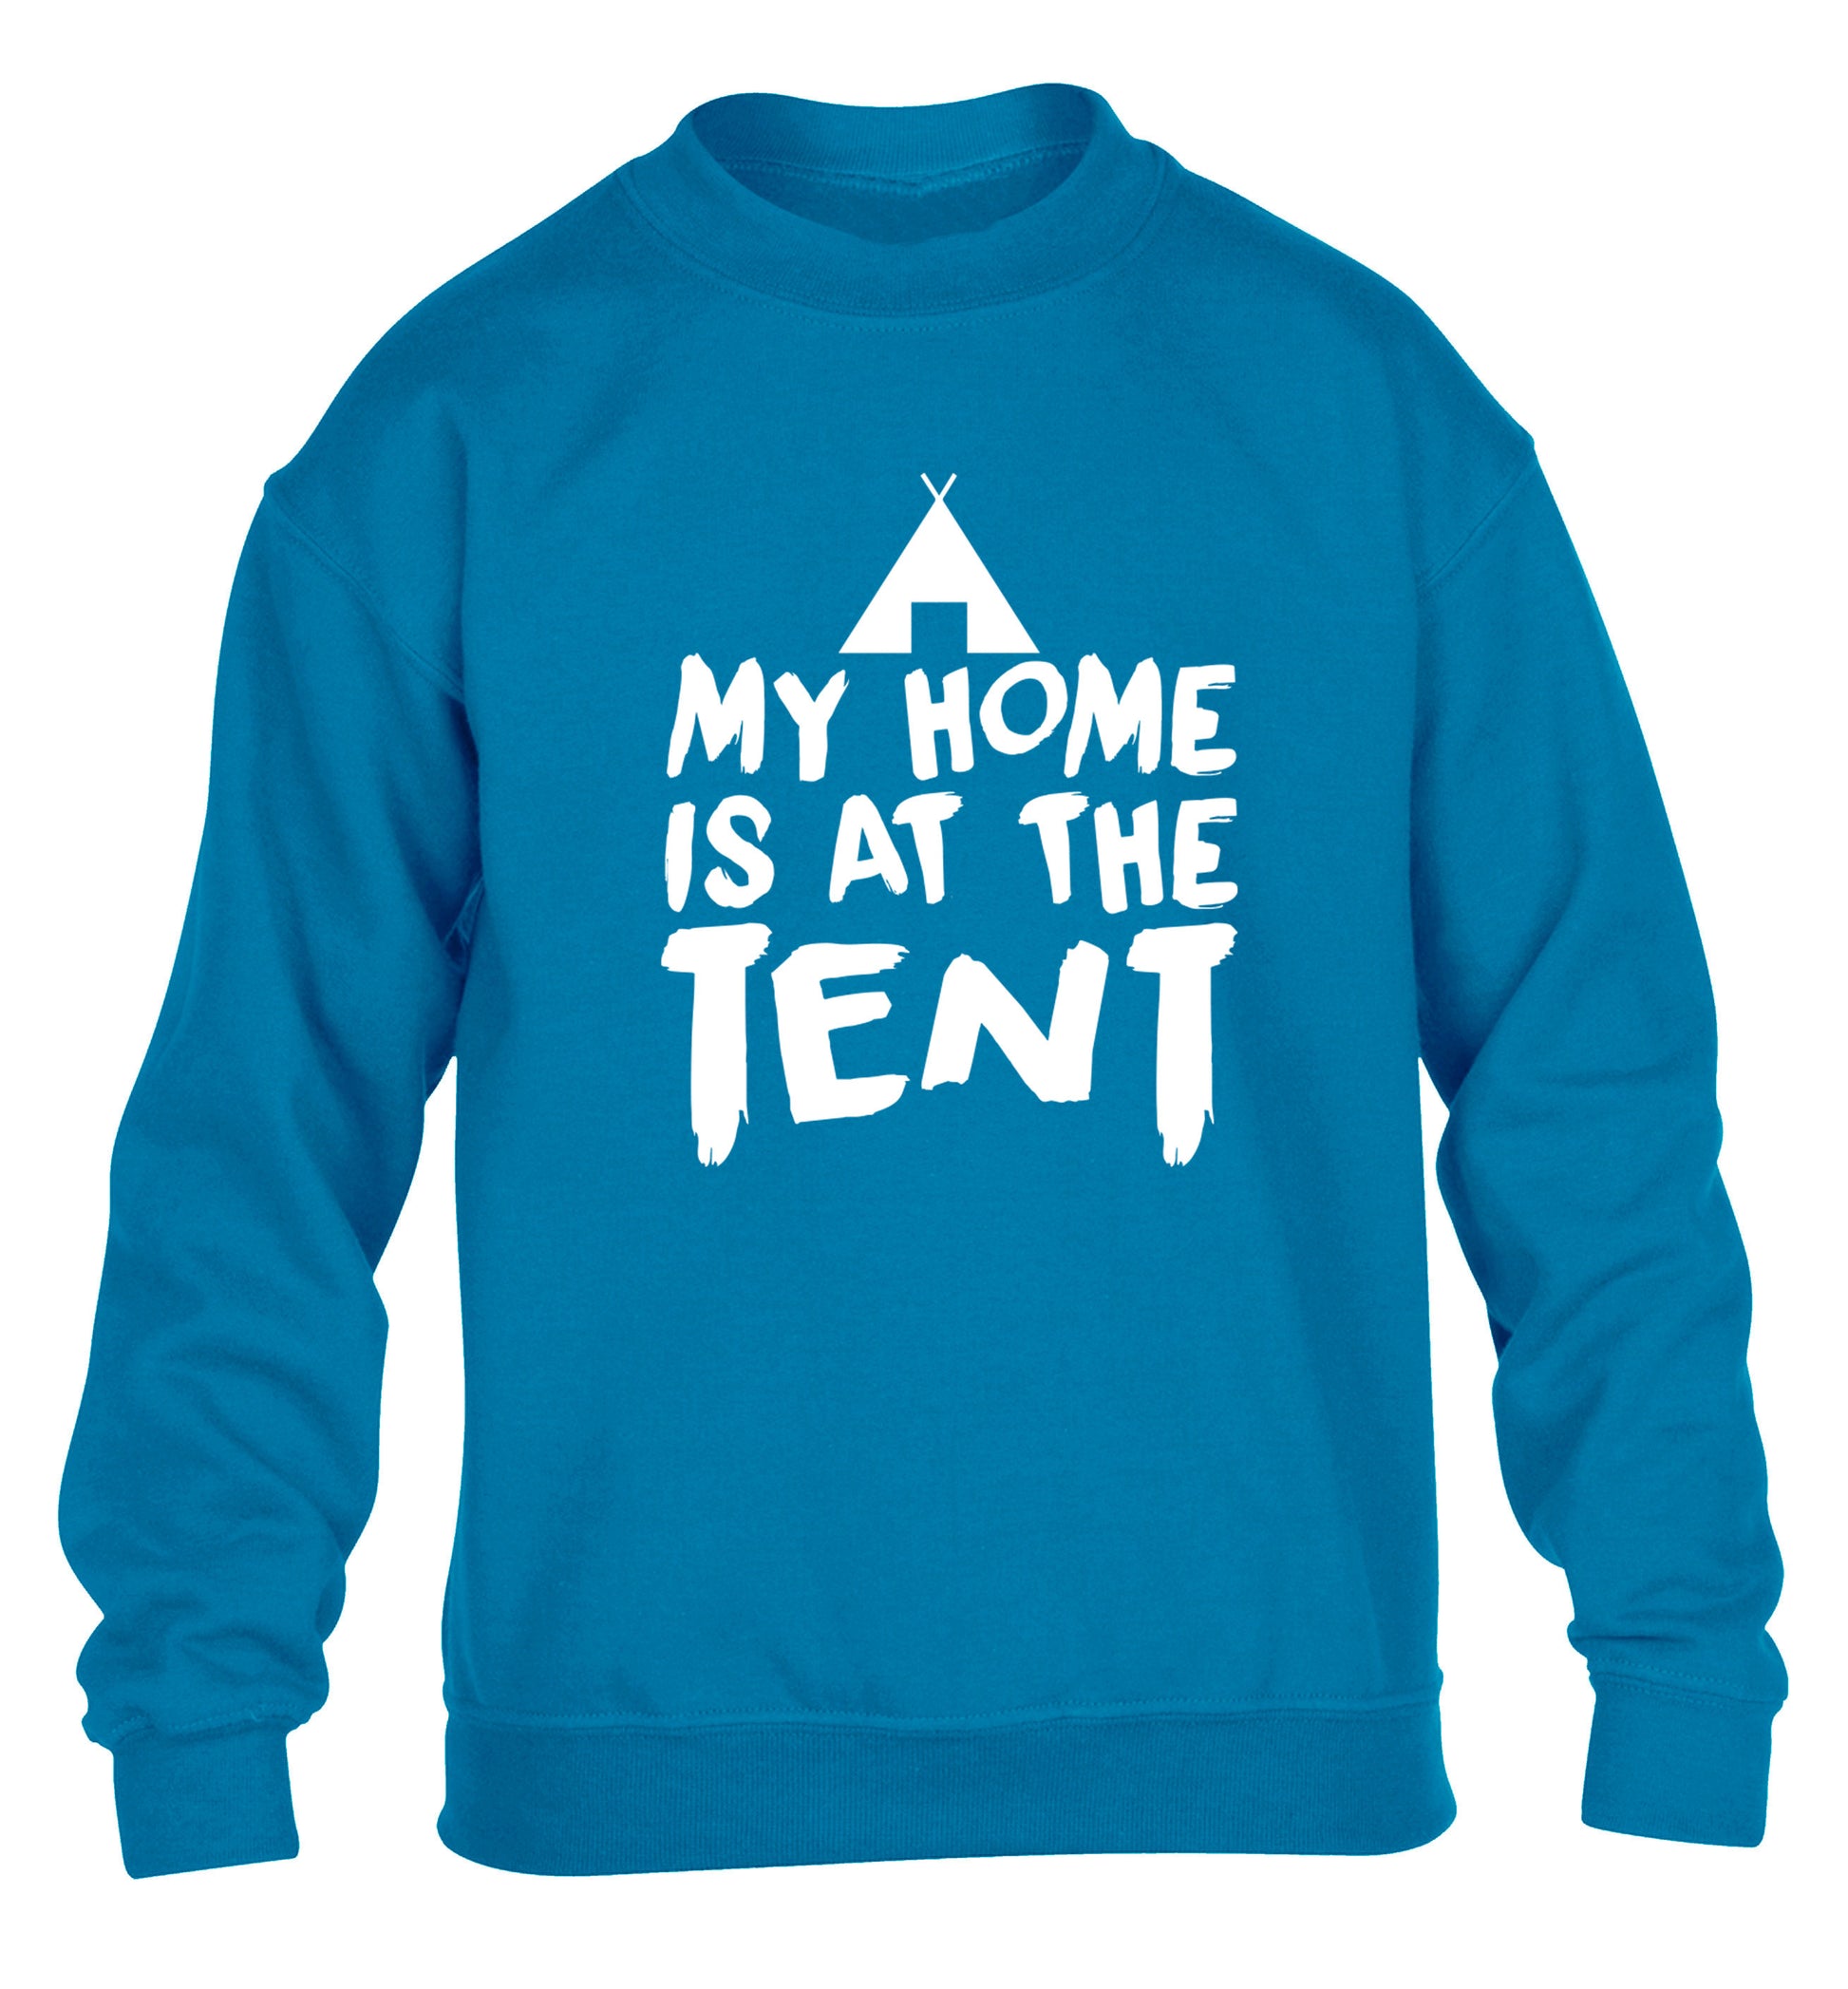 My home is at the tent children's blue sweater 12-14 Years